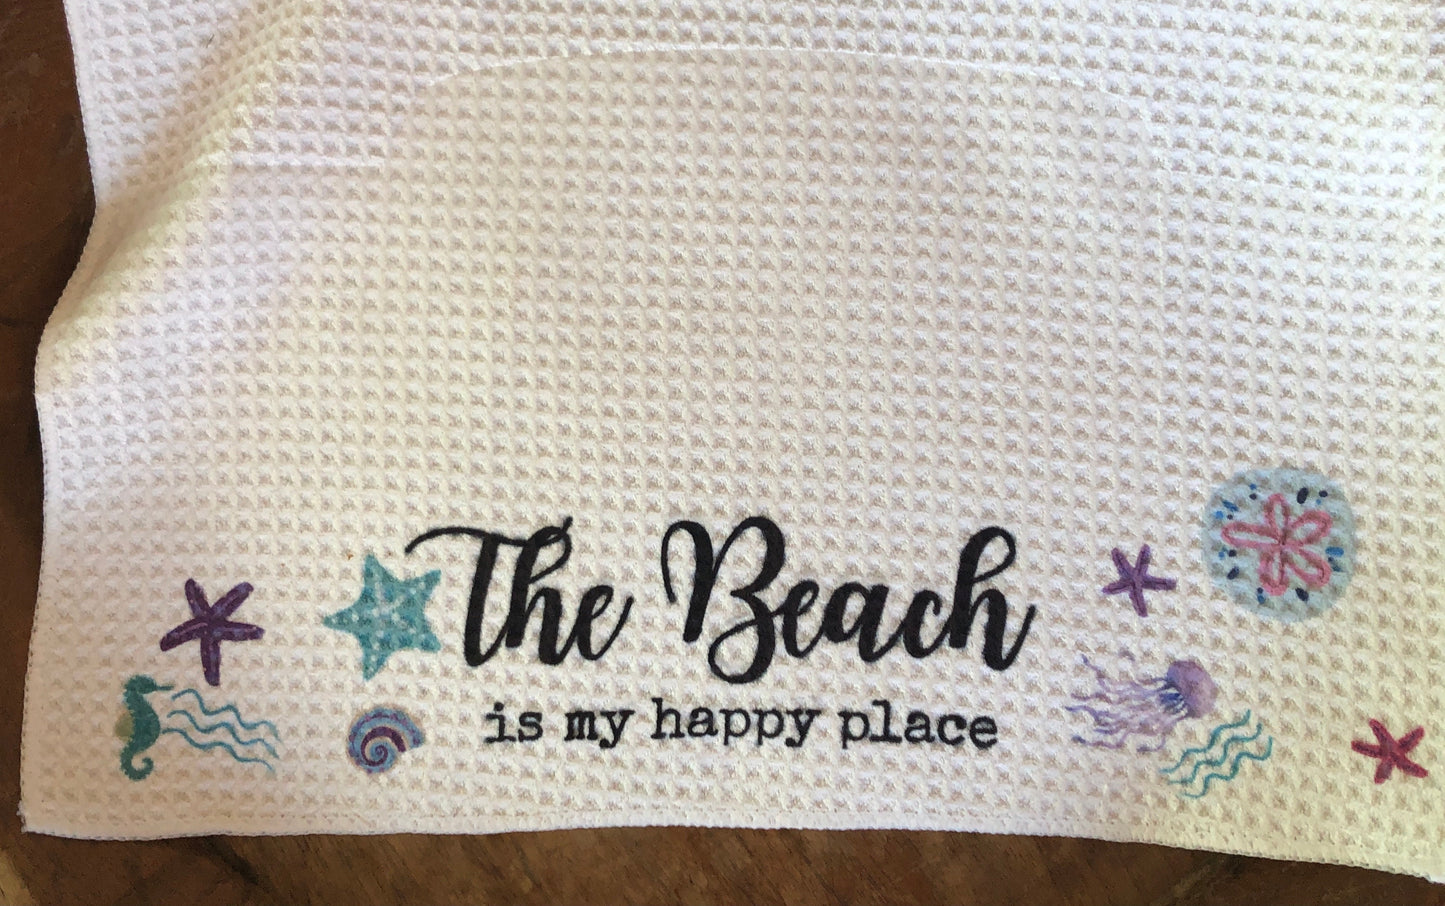 PDX Flower Power "The Beach is my happy place"